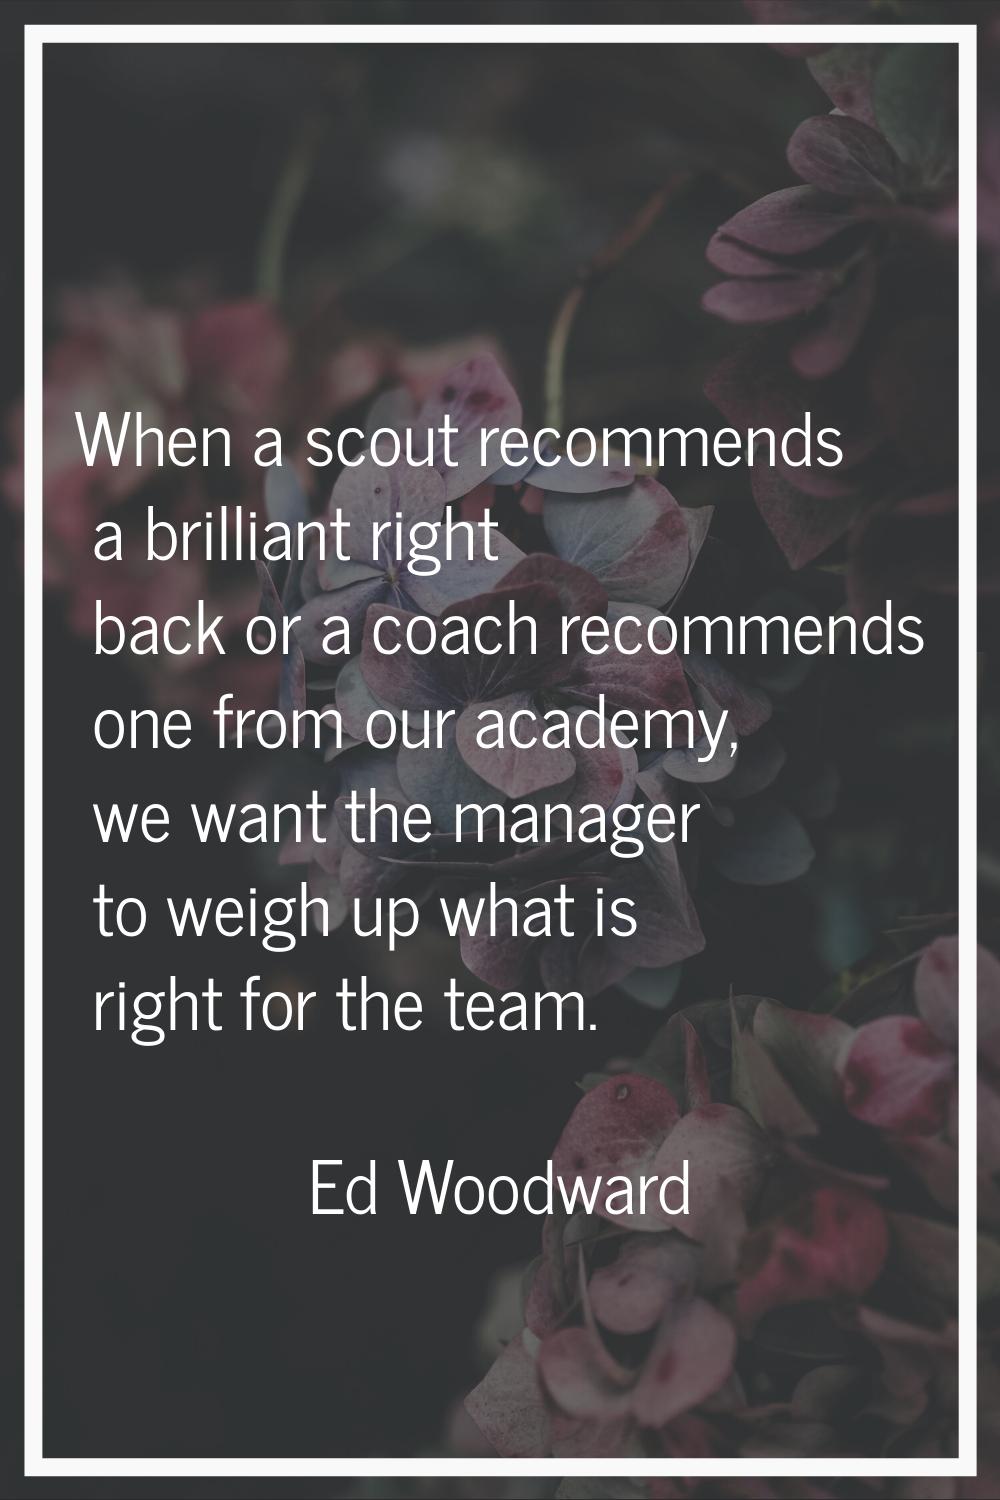 When a scout recommends a brilliant right back or a coach recommends one from our academy, we want 